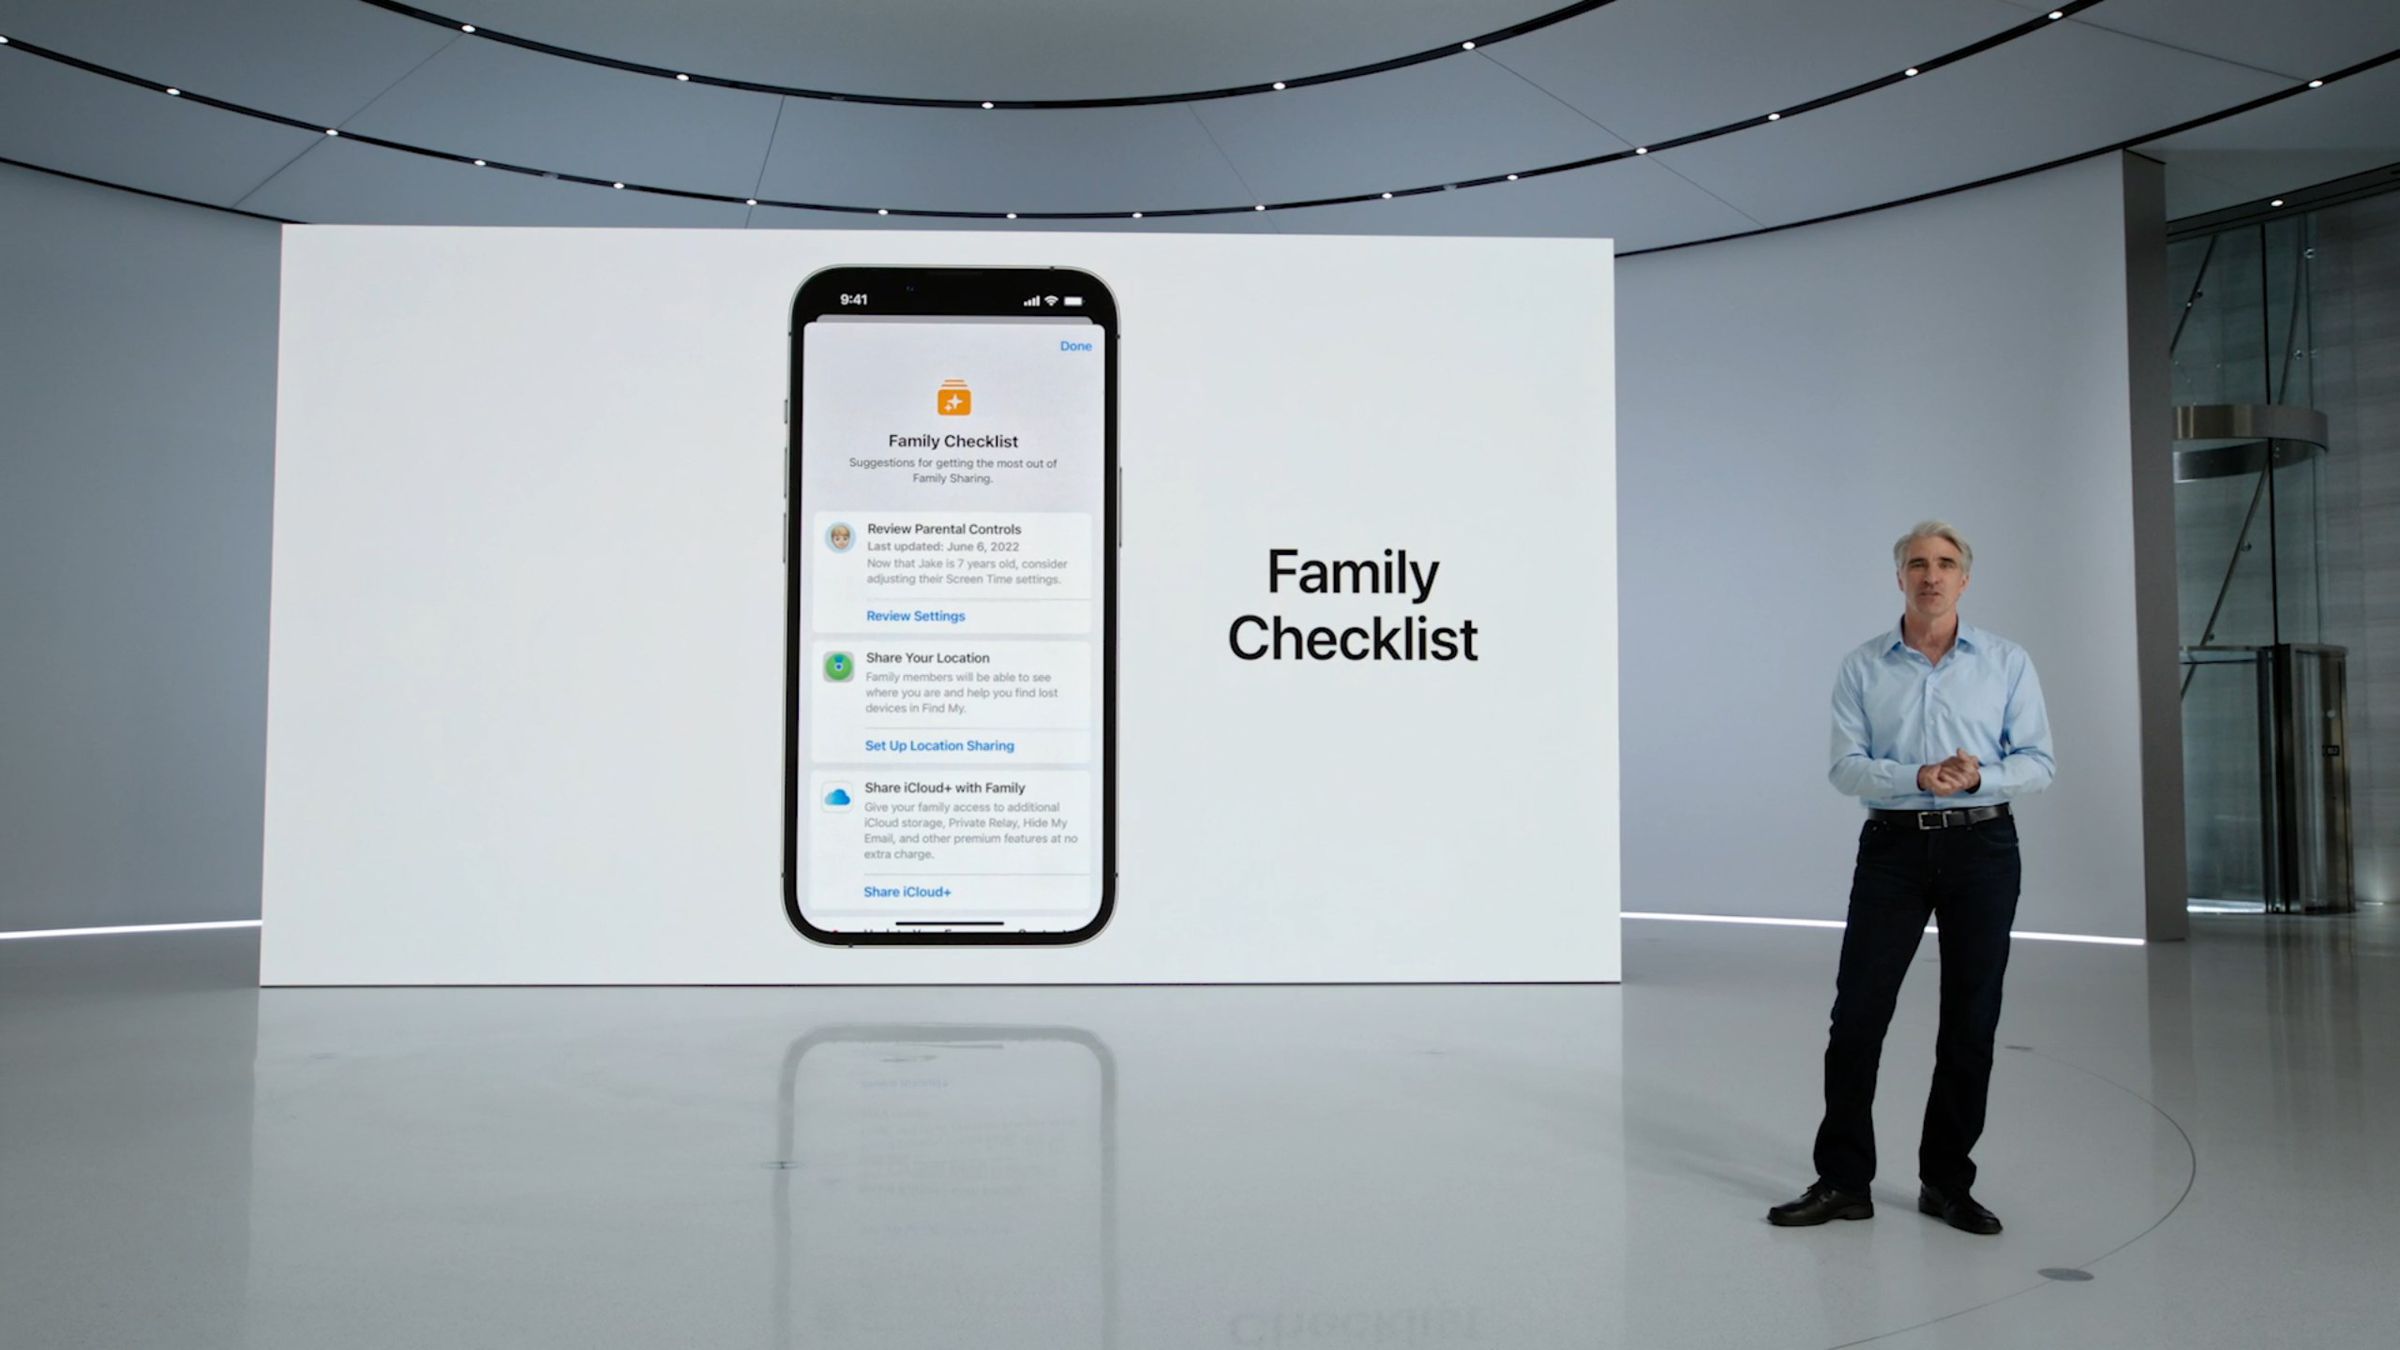 A new Family Checklist feature should help parents make sure they are getting the most out of Apple’s Family Sharing and Screen Time tools.